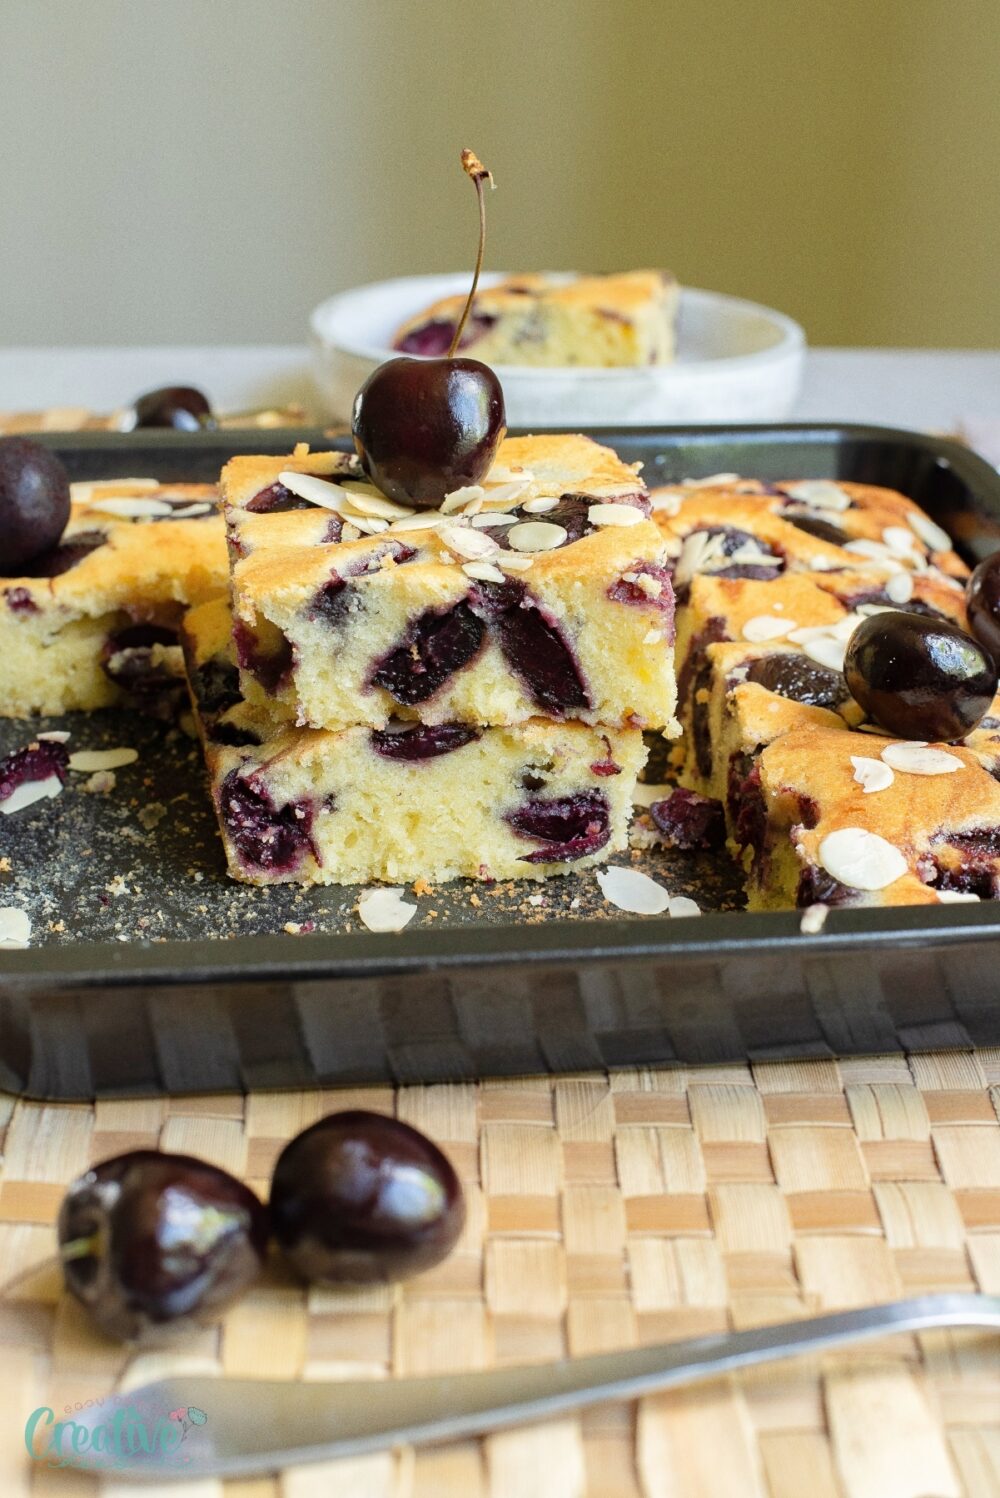 Savor the irresistible charm of a fresh cherry cake, crowned with juicy cherries and a delightful touch of almonds.